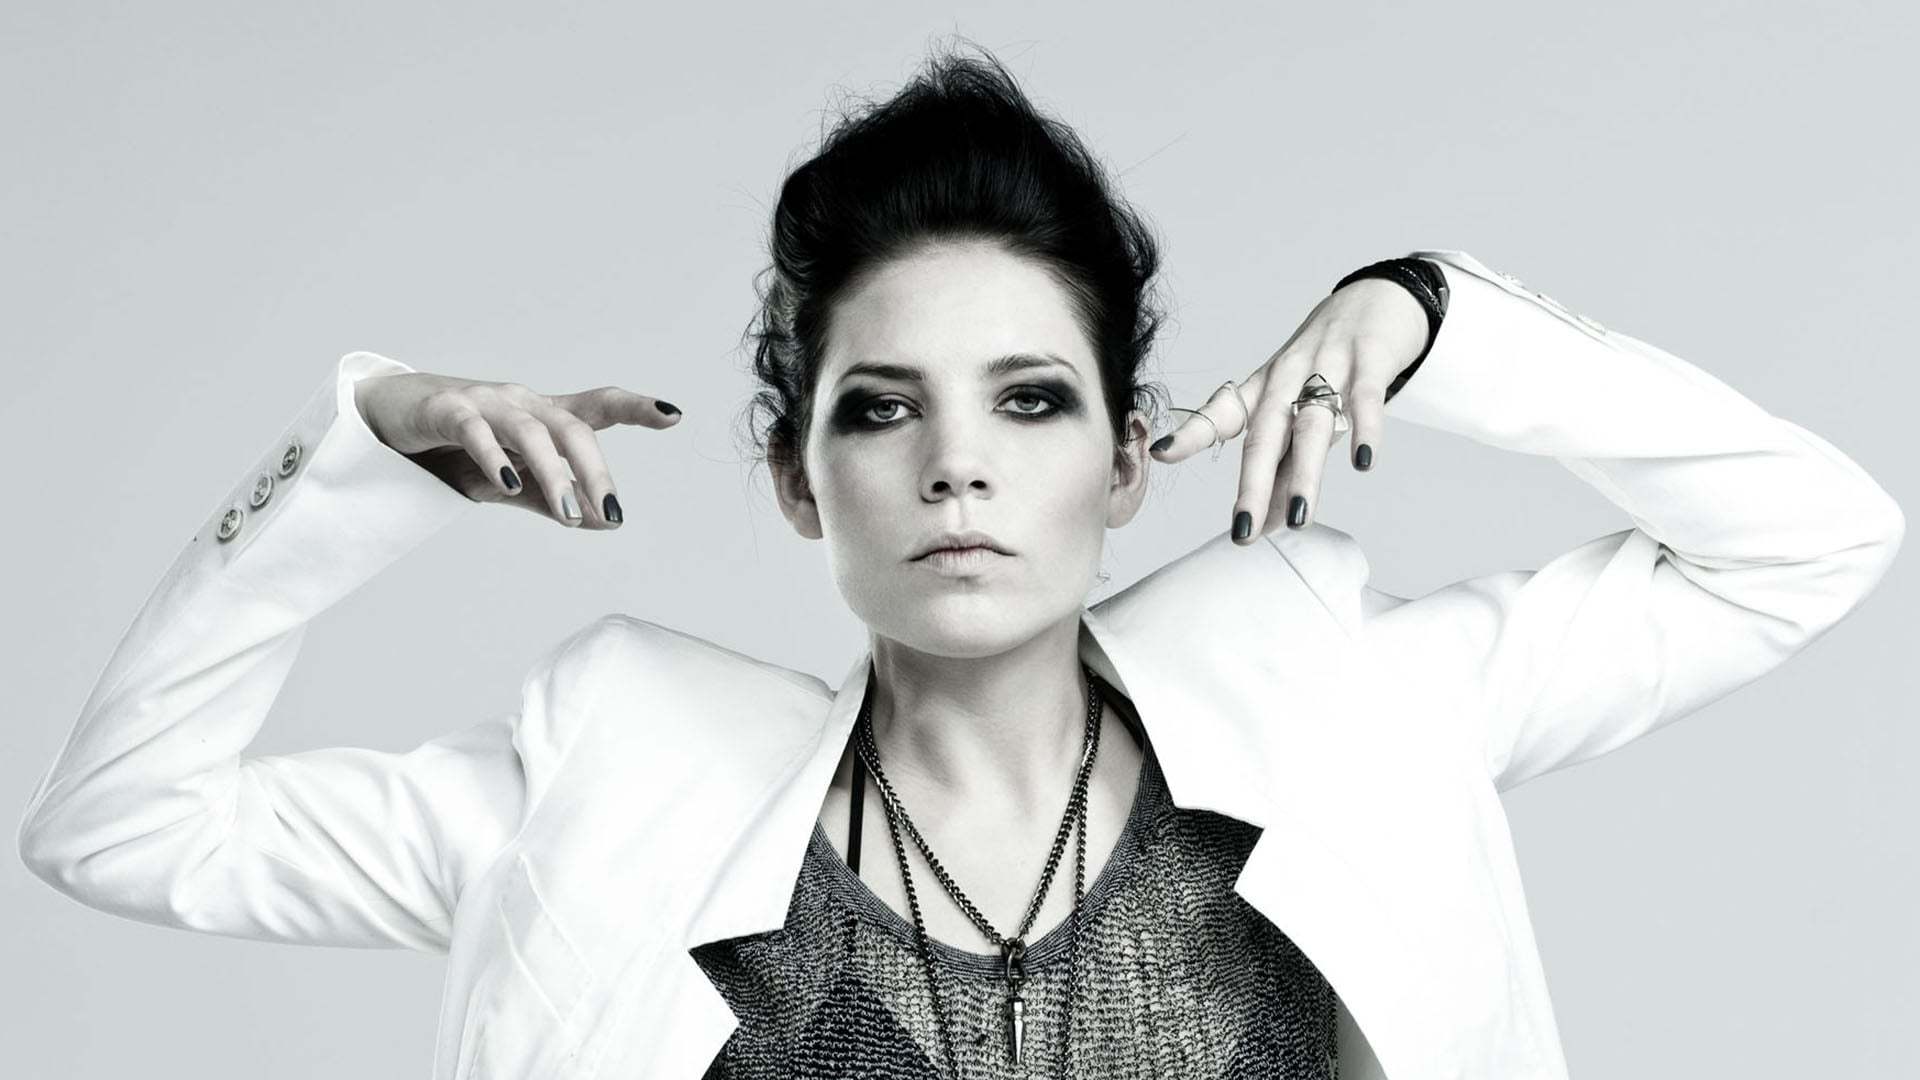 Skylar Grey Wallpaper Image Photos Pictures Background